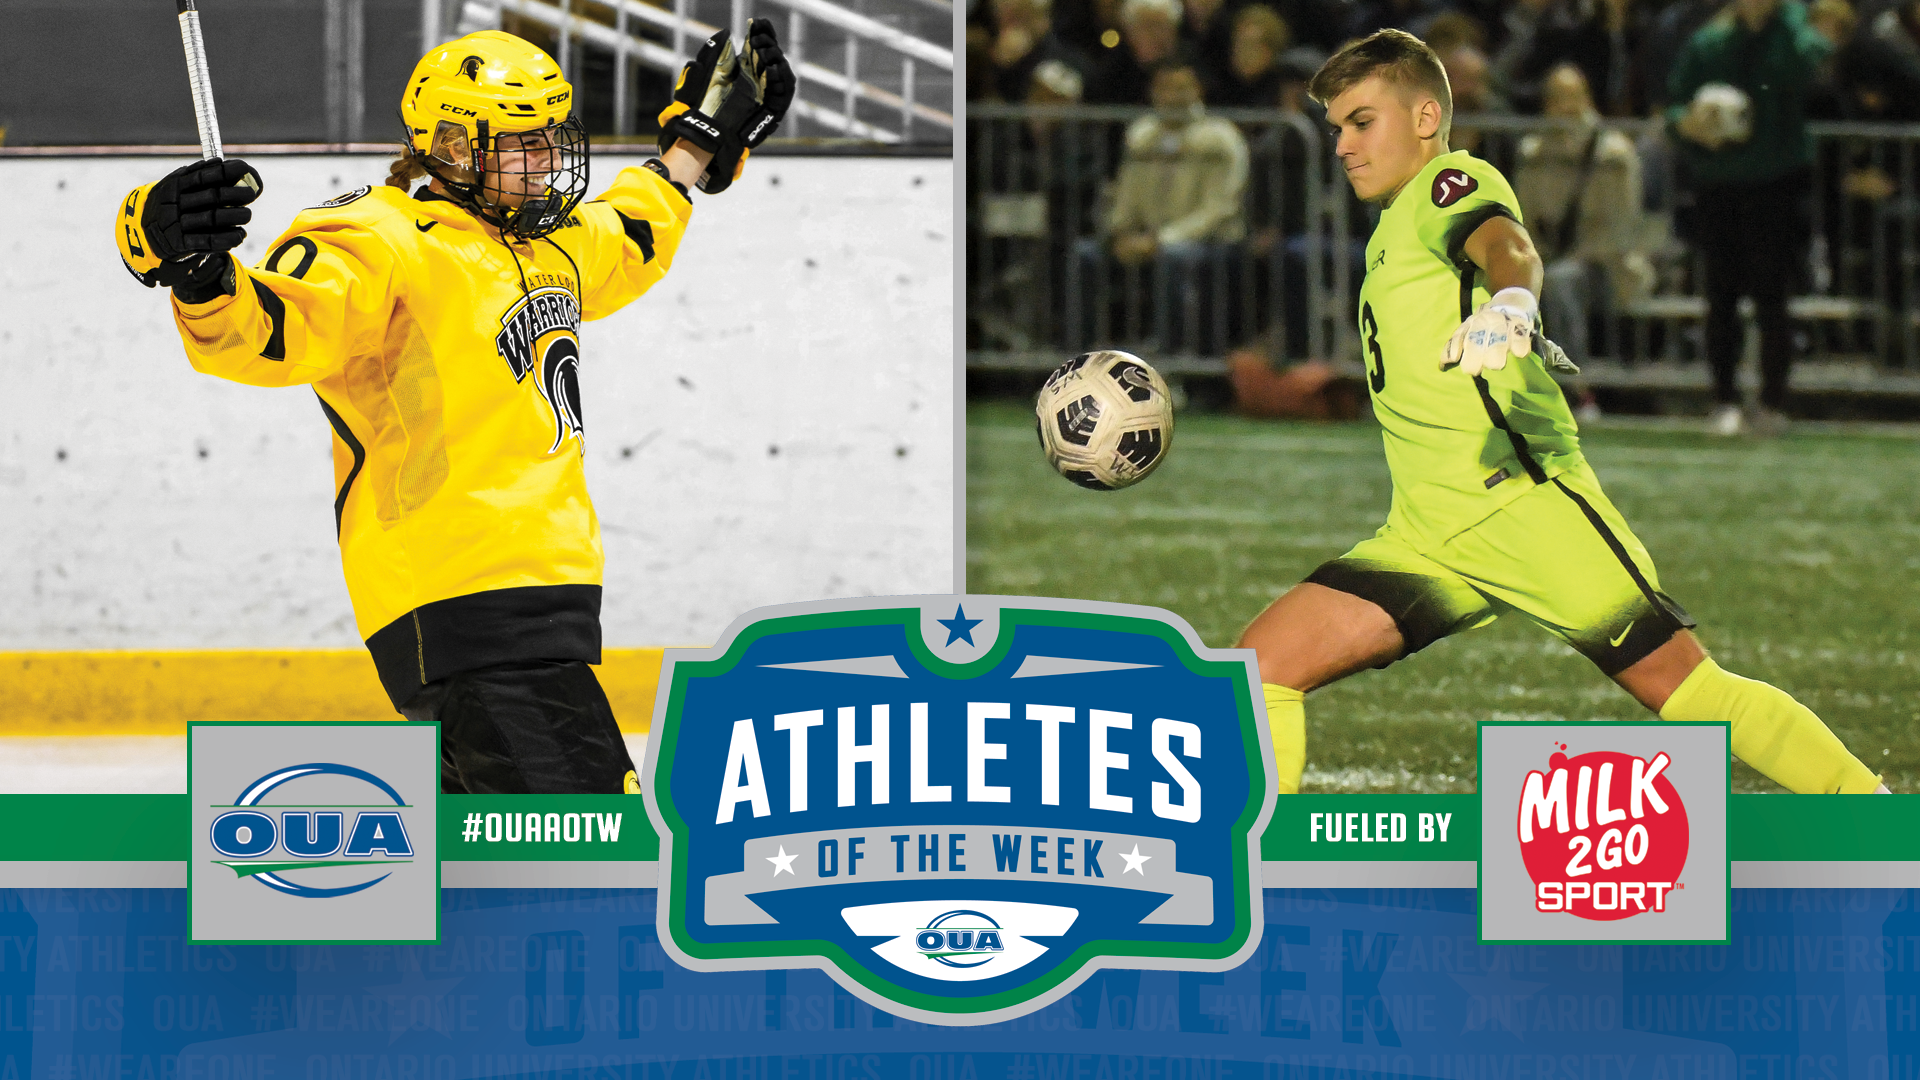 Herrfort, Cagalj named OUA athletes of the week